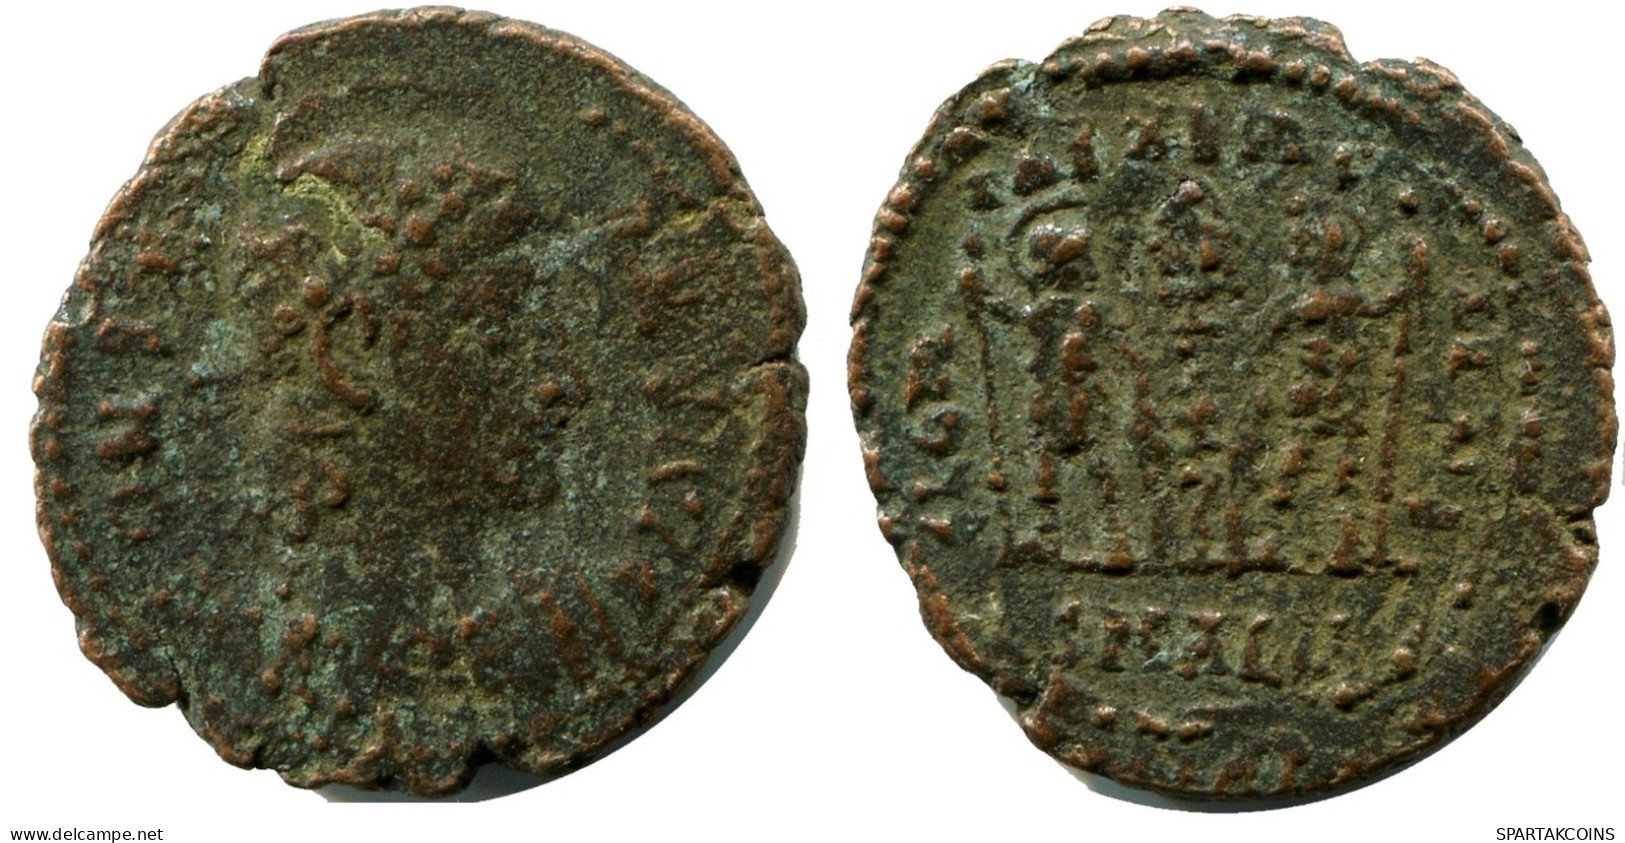 CONSTANS MINTED IN ALEKSANDRIA FOUND IN IHNASYAH HOARD EGYPT #ANC11347.14.F.A - The Christian Empire (307 AD To 363 AD)